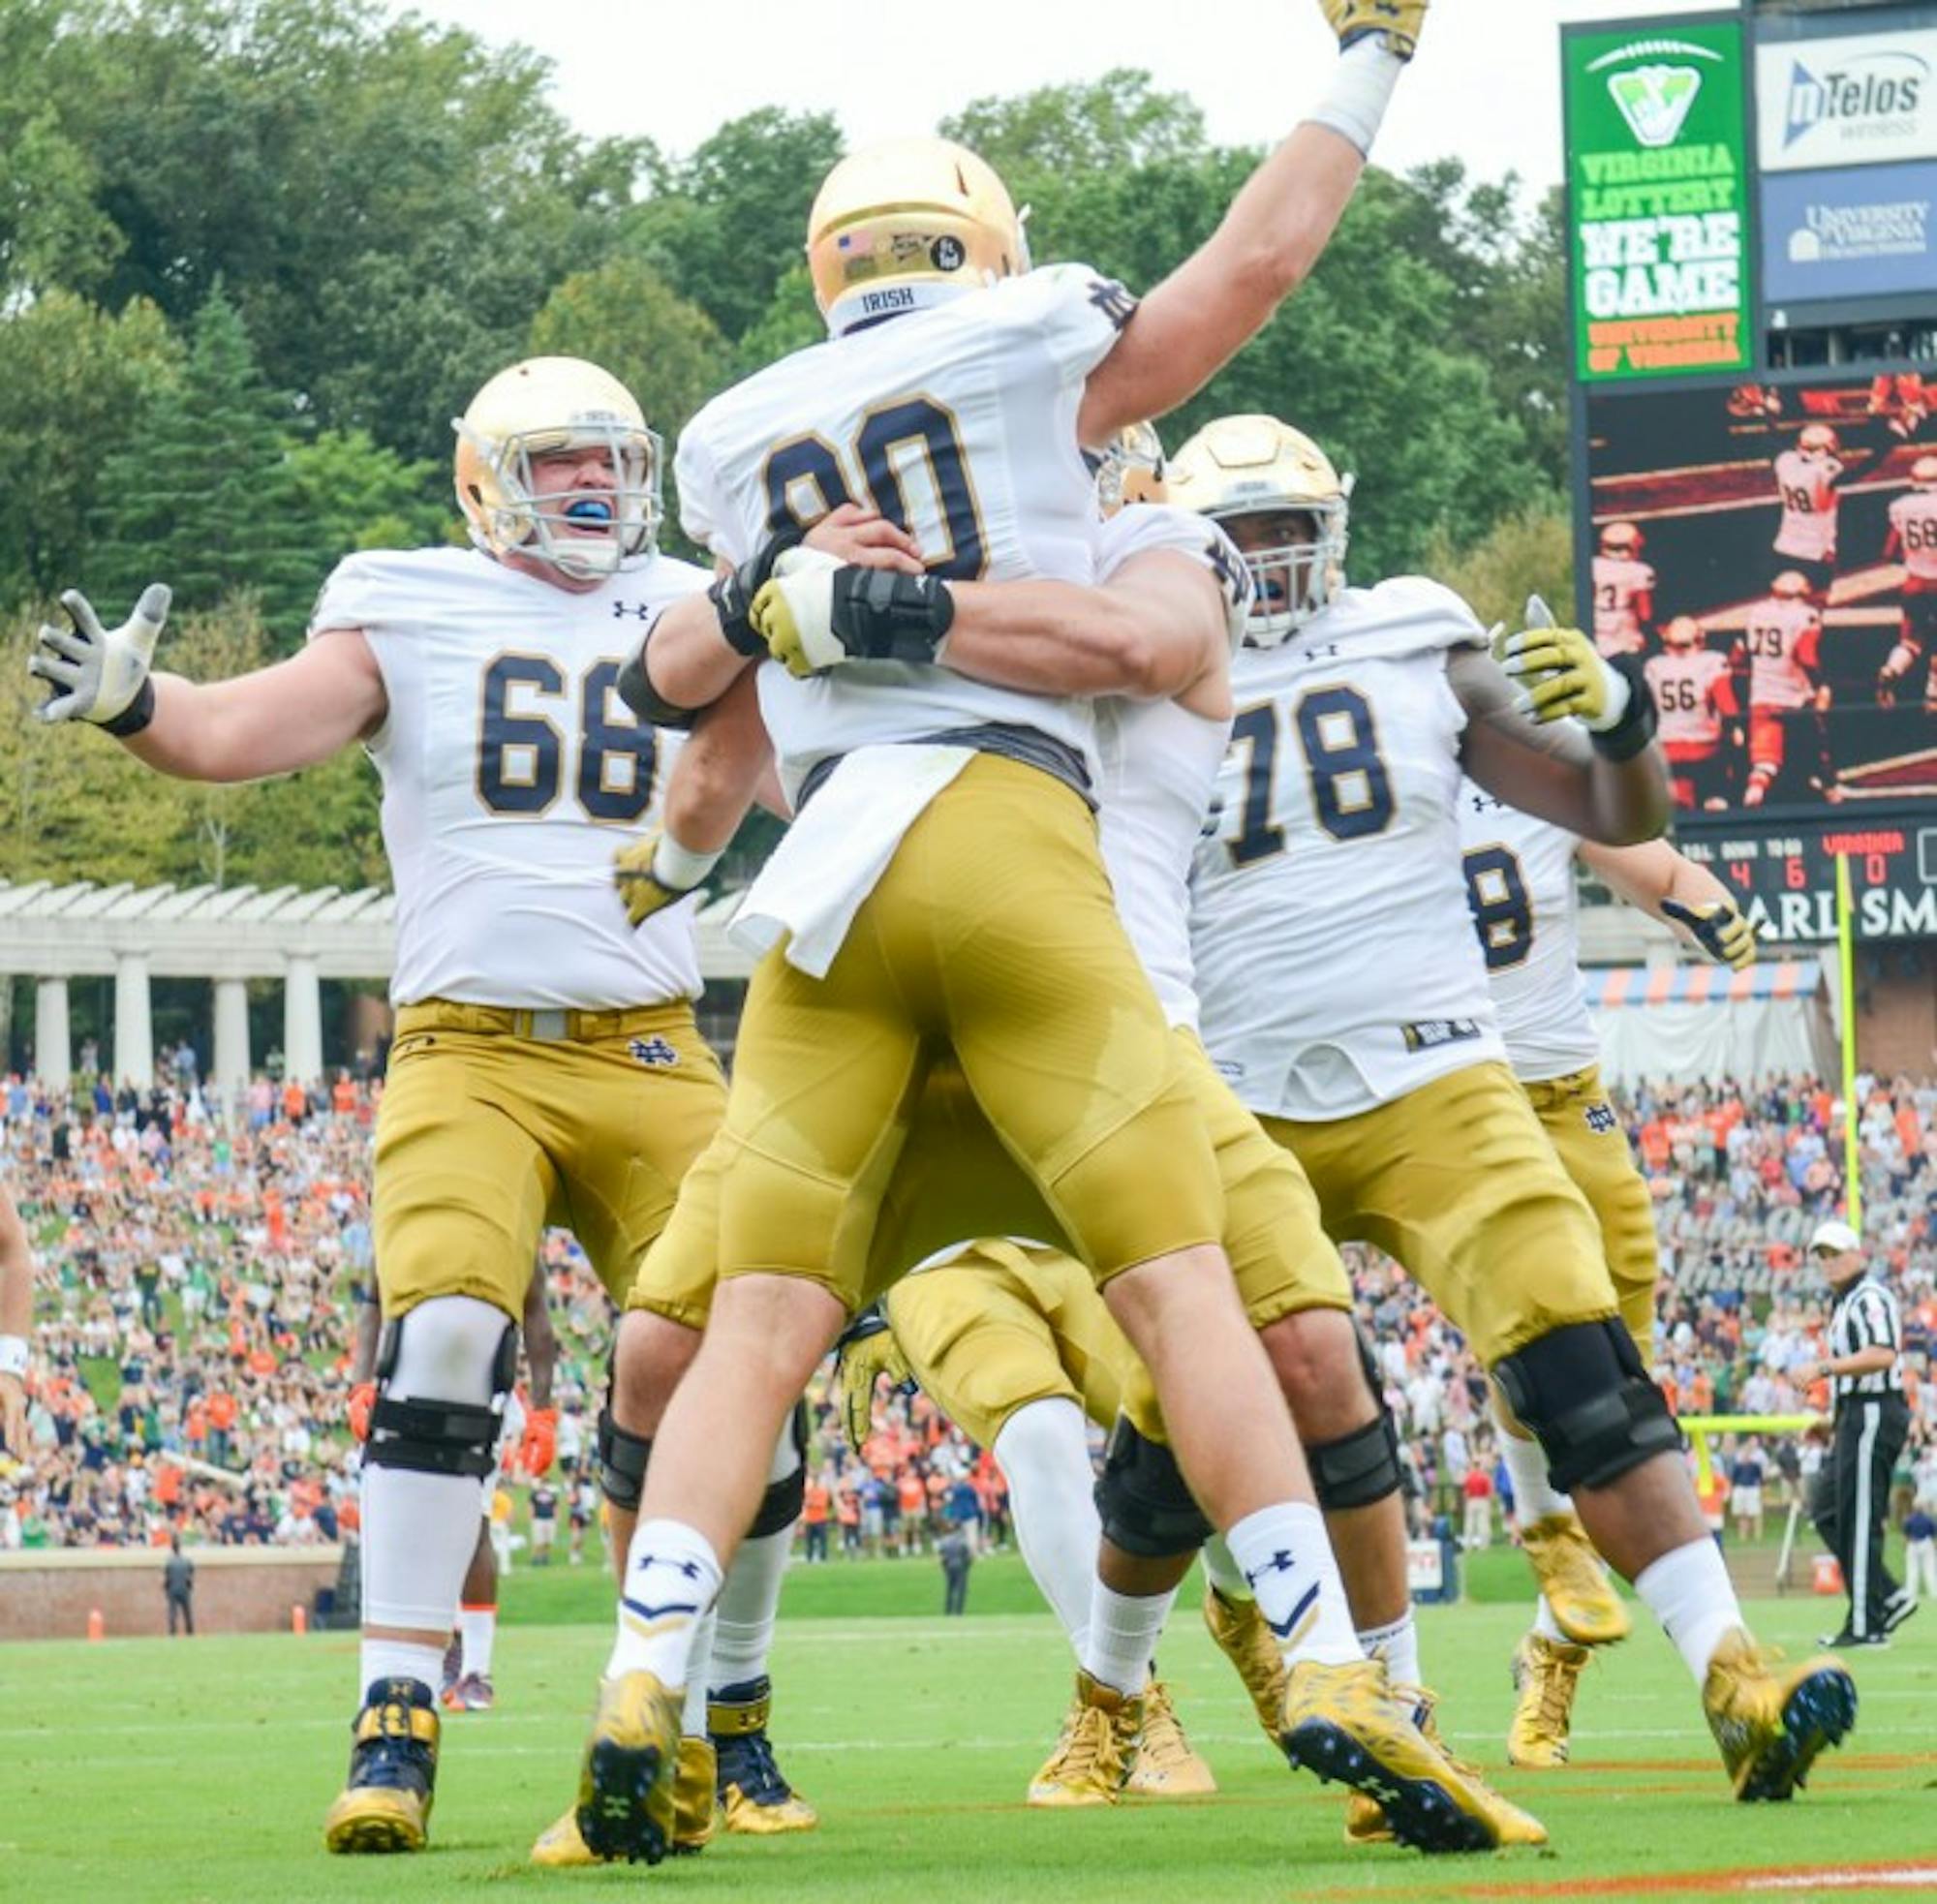 Notre Dame junior tight end Durhma Smythe celebrates after a score during Saturday's 34-27 win over Virginia at Scott Stadium.